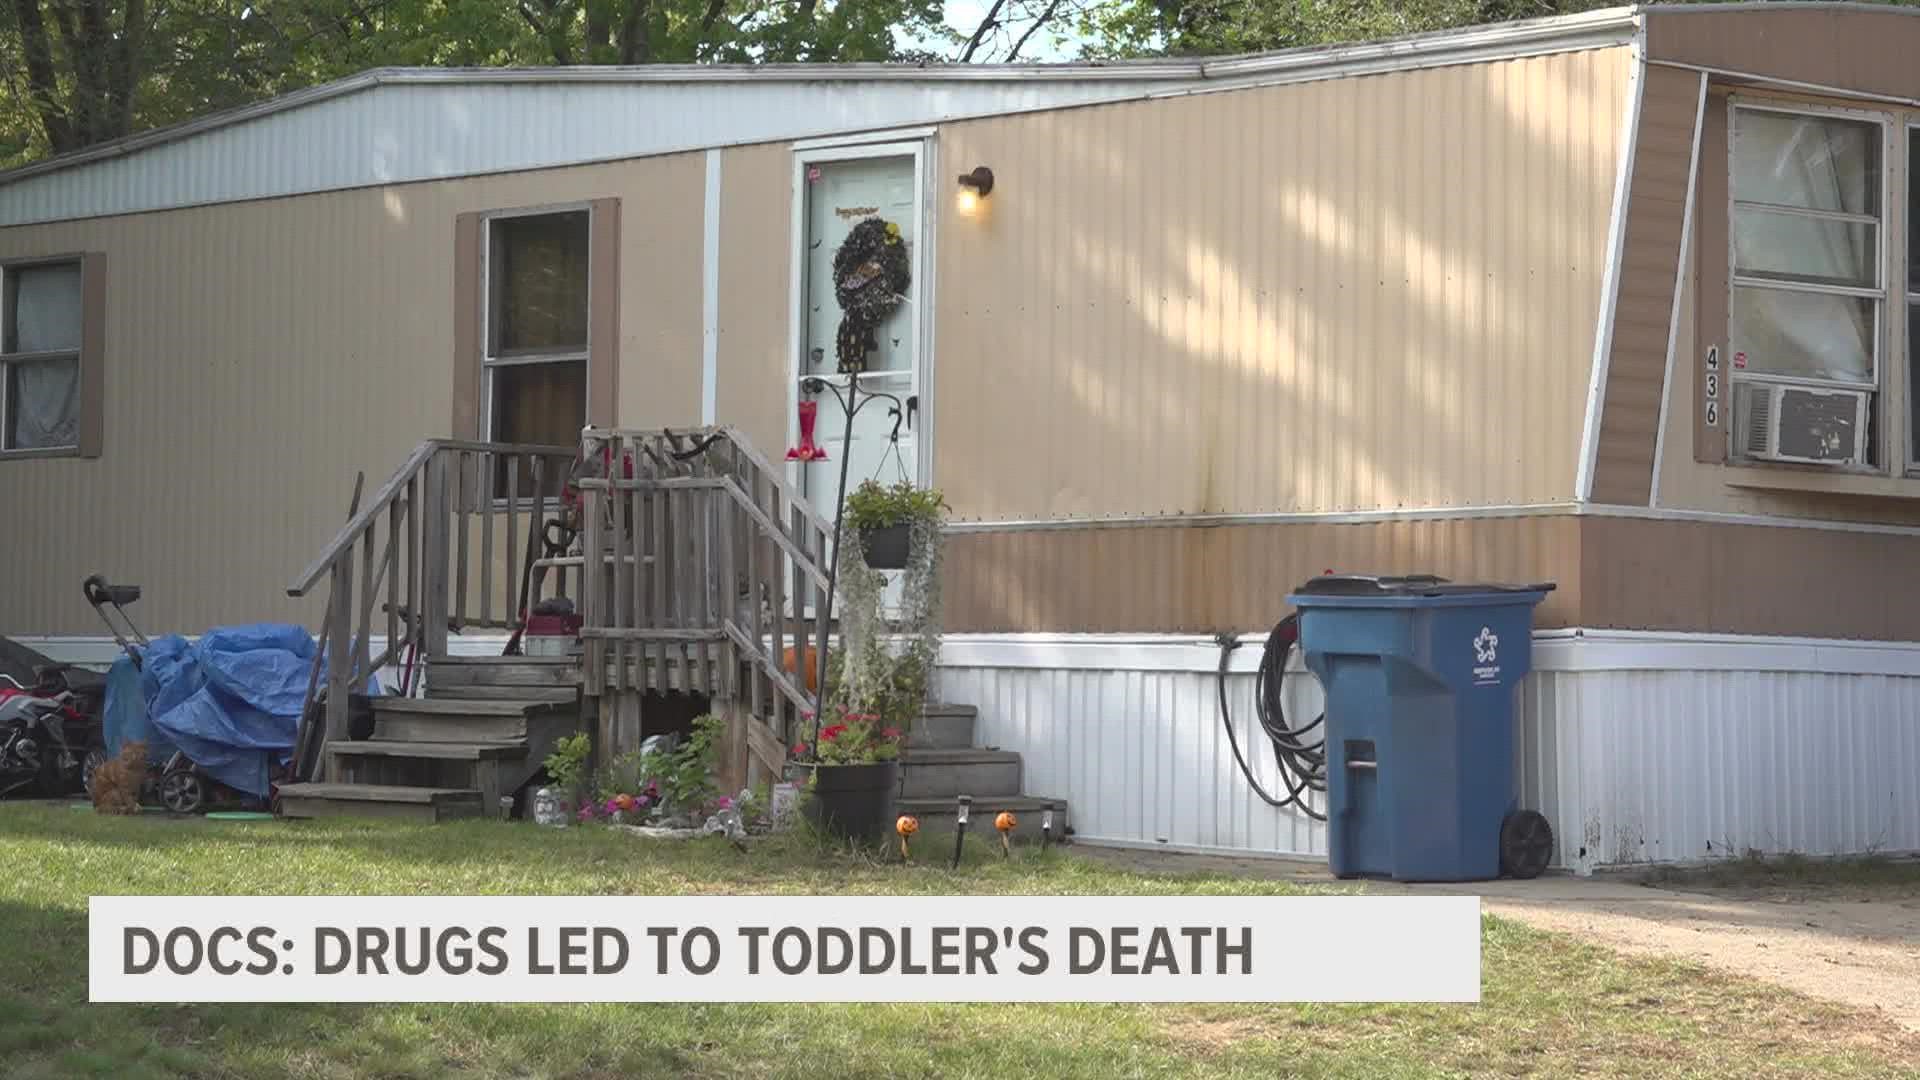 Medication was found scattered throughout the house and on the floor, authorities said. Detectives also found a vape pen in the toddler's crib.